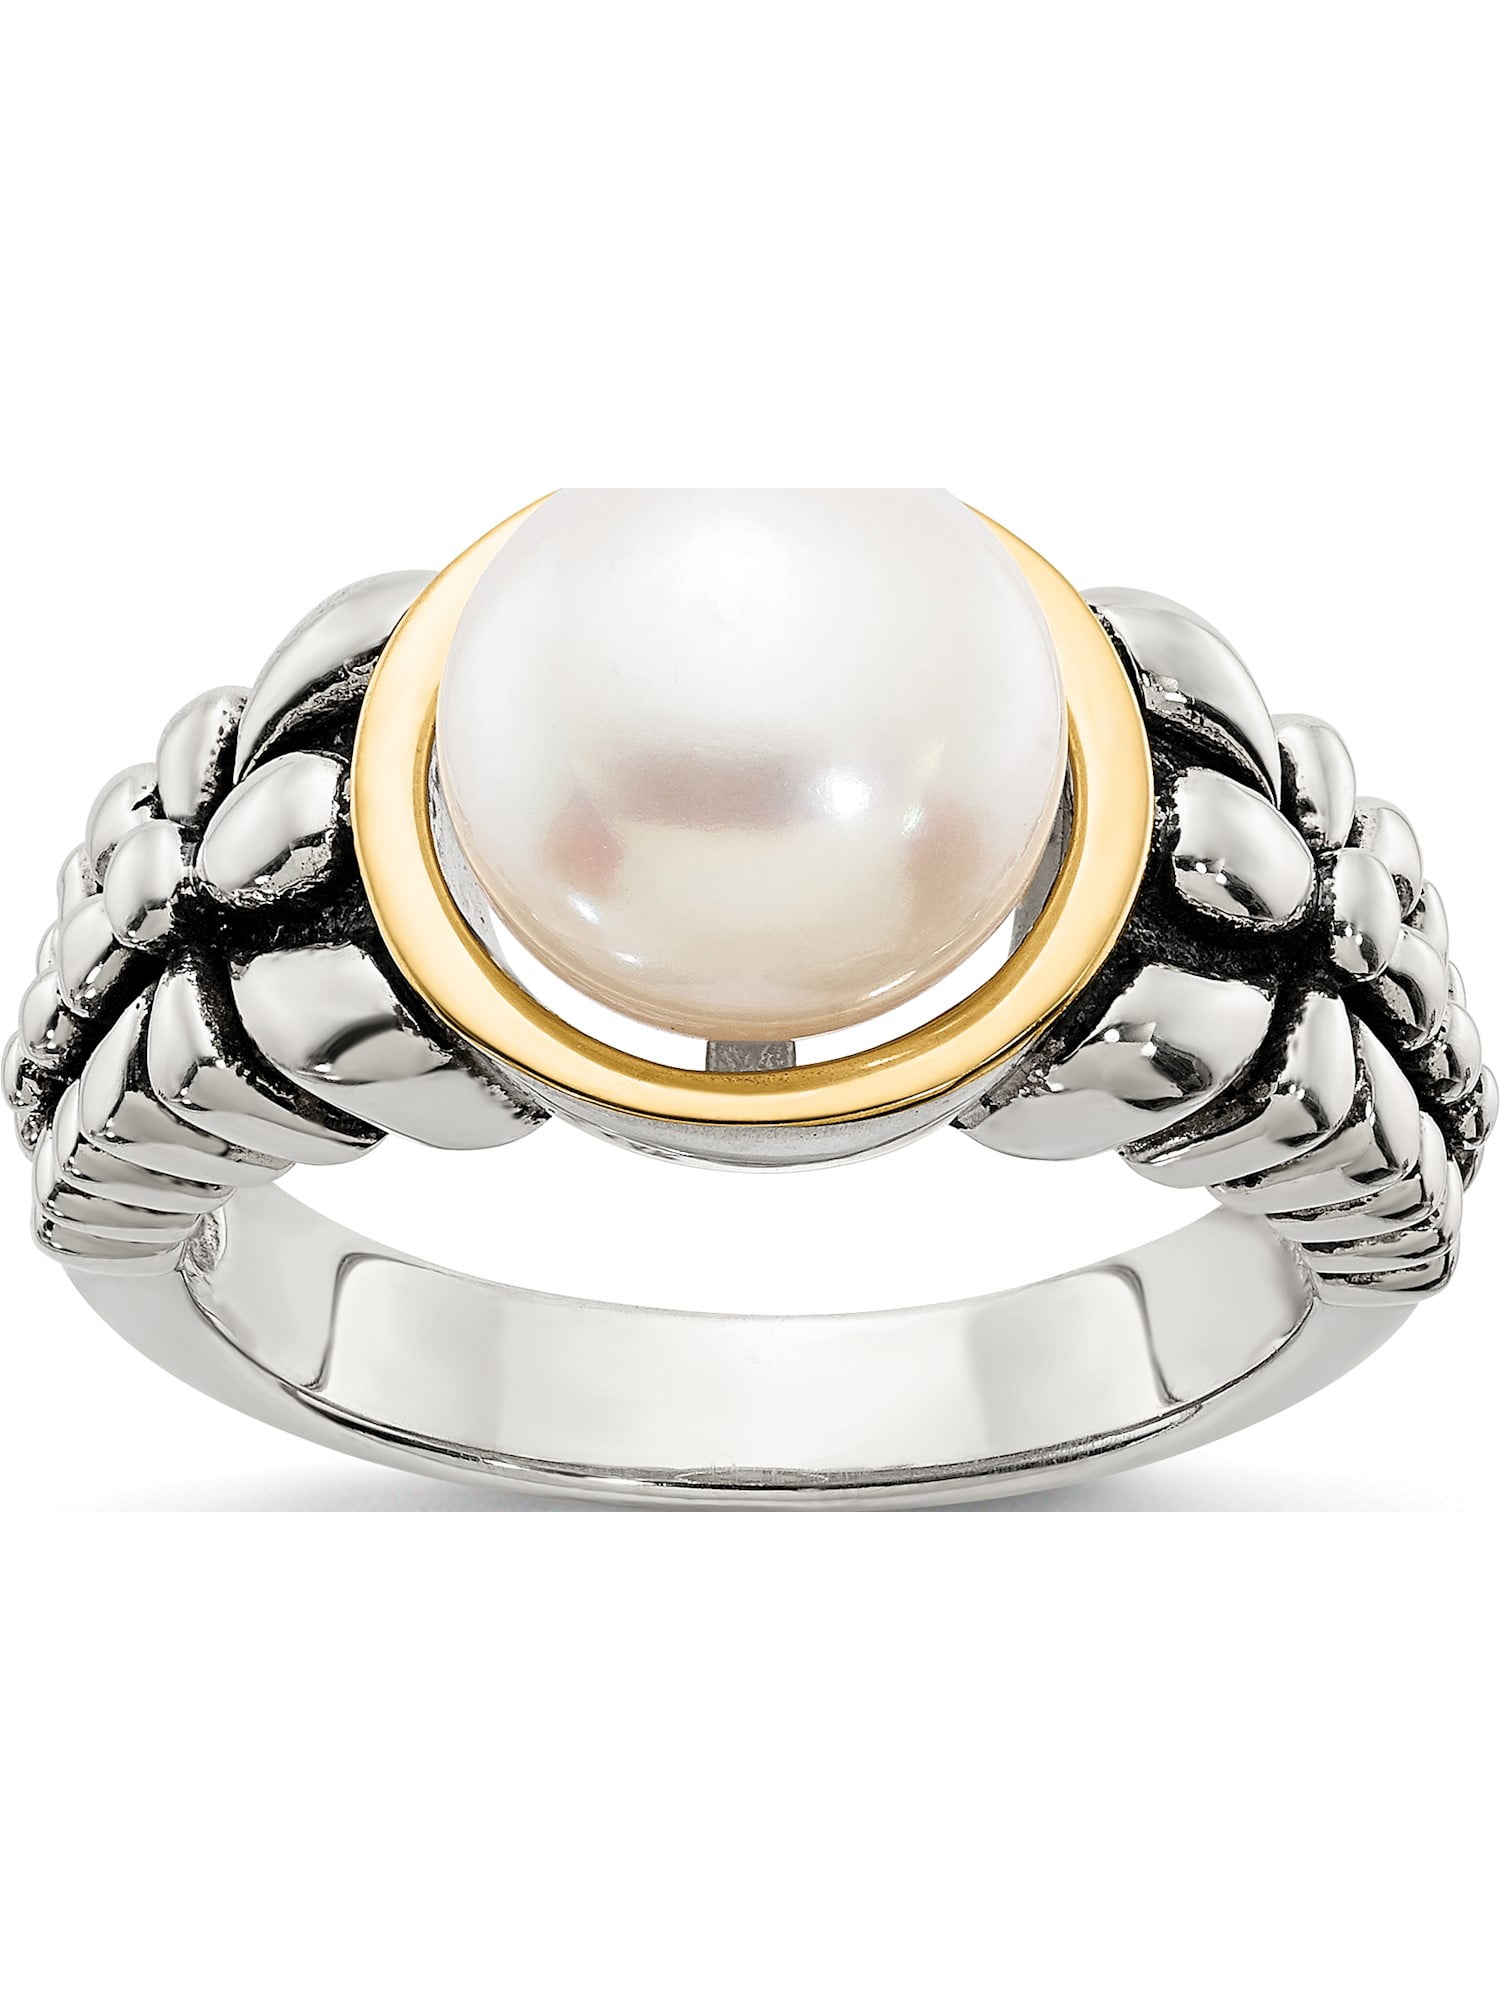 Sterling Silver w/ 14K Gold-Plated 12mm Freshwater Cultured Pearl Vintage Ring